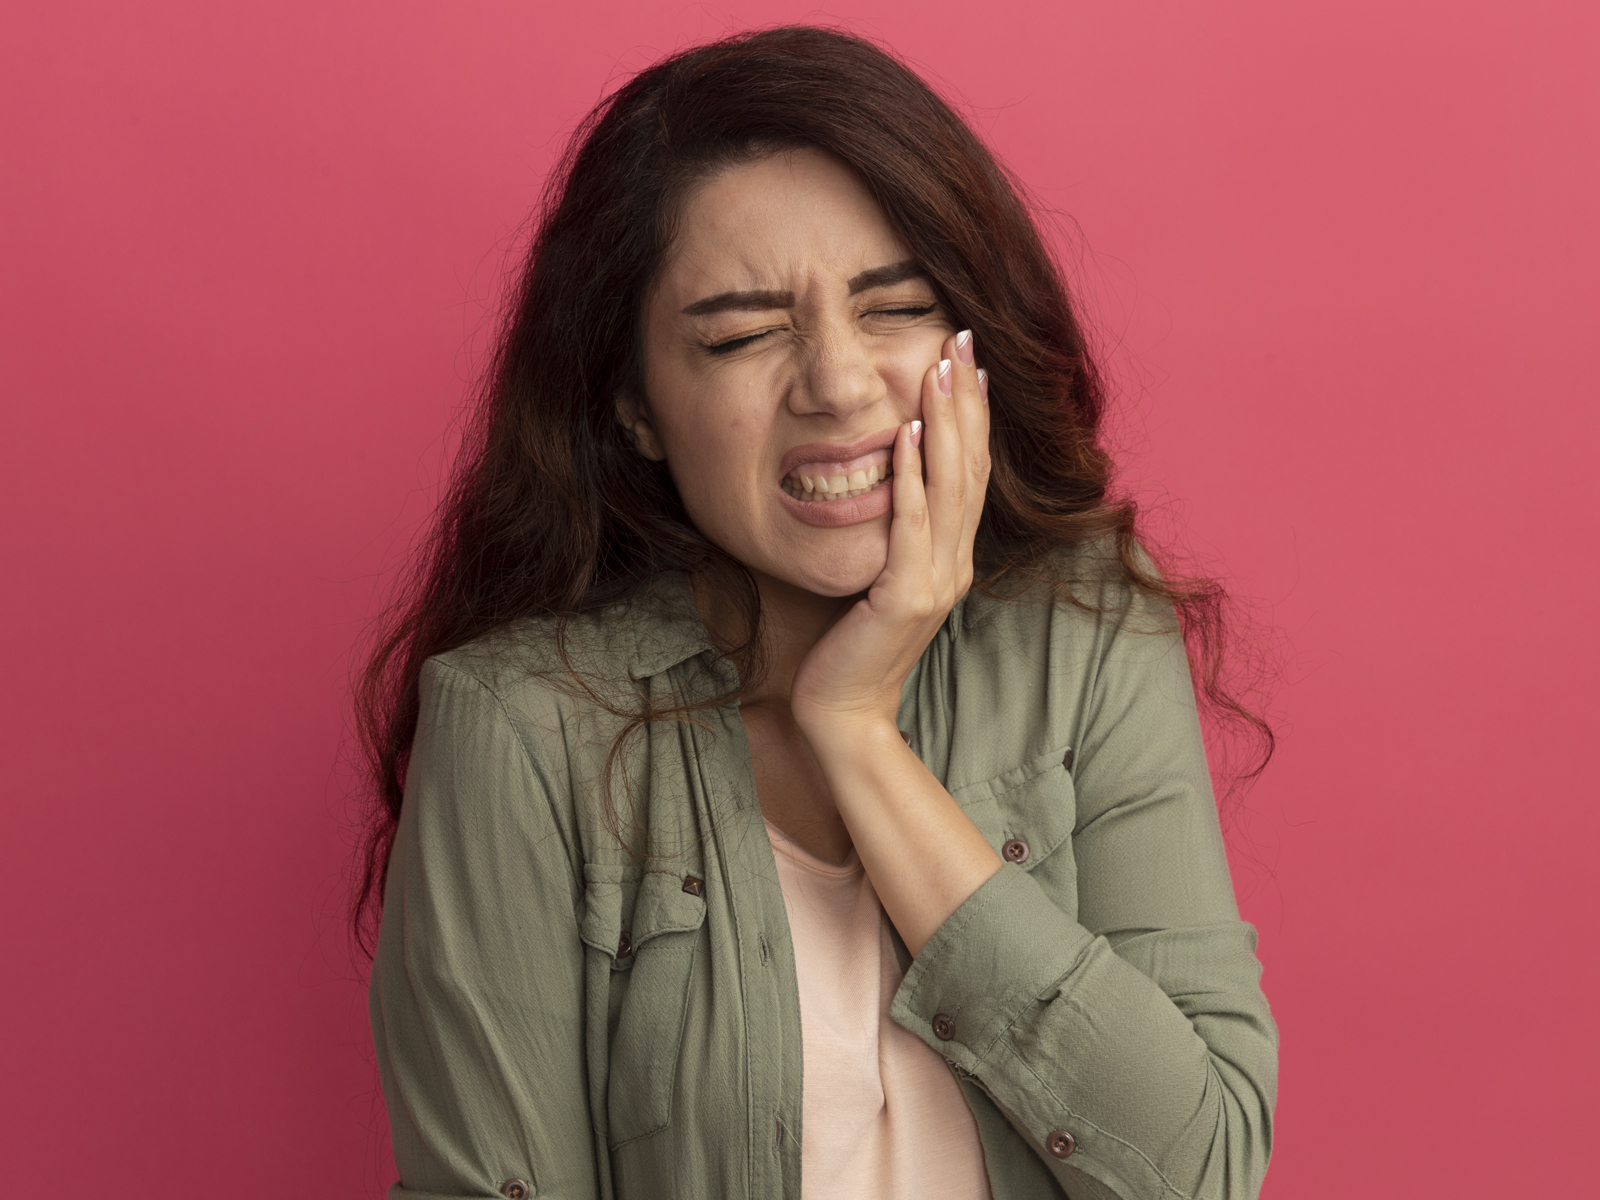 How painful is a tooth extraction?